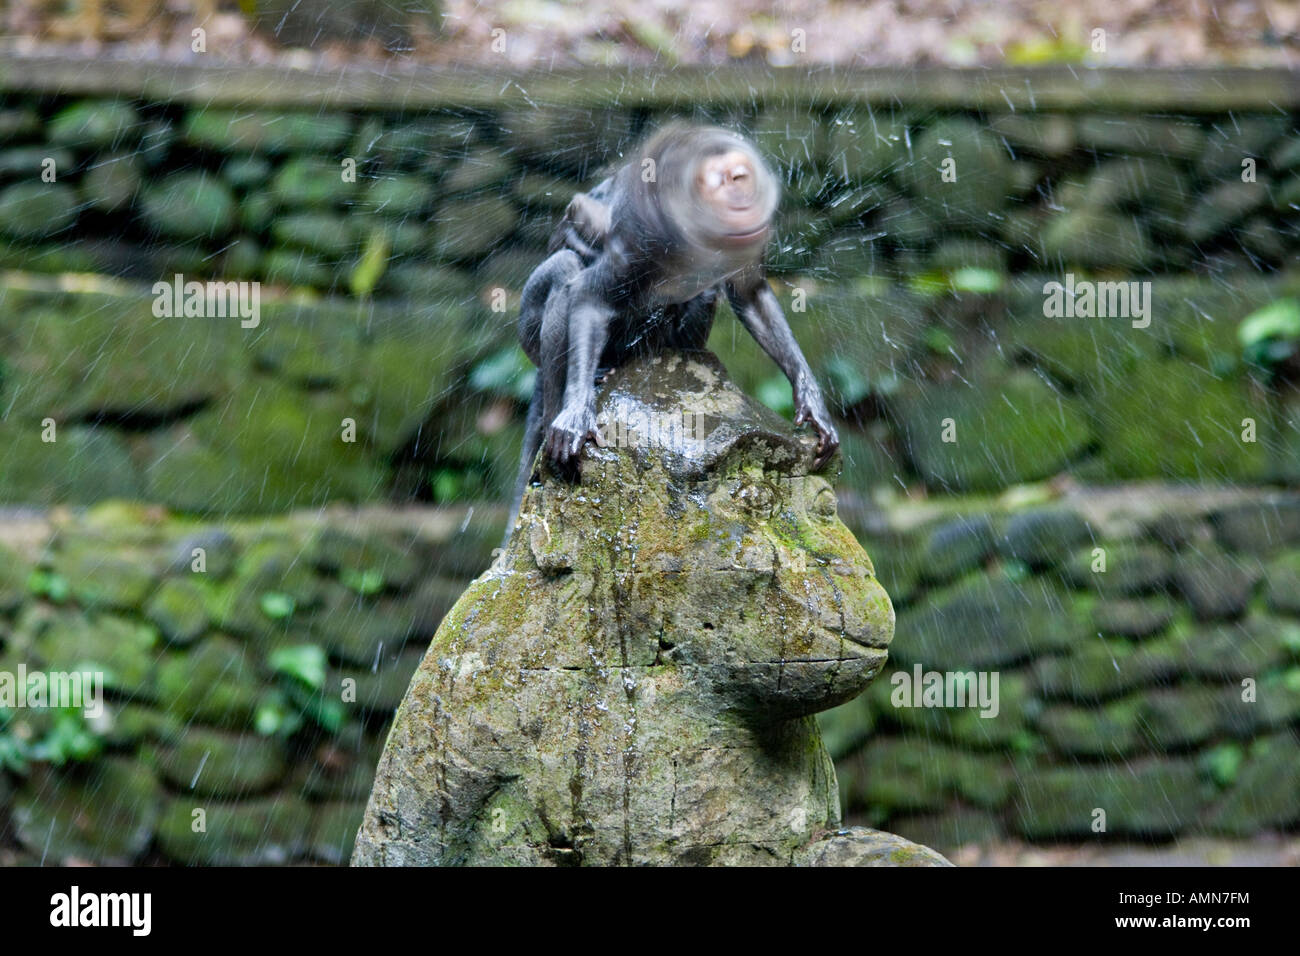 Shaking itself Dry Long Tailed Macaques Macaca Fascicularis Monkey Forest Ubud Bali Indonesia Stock Photo